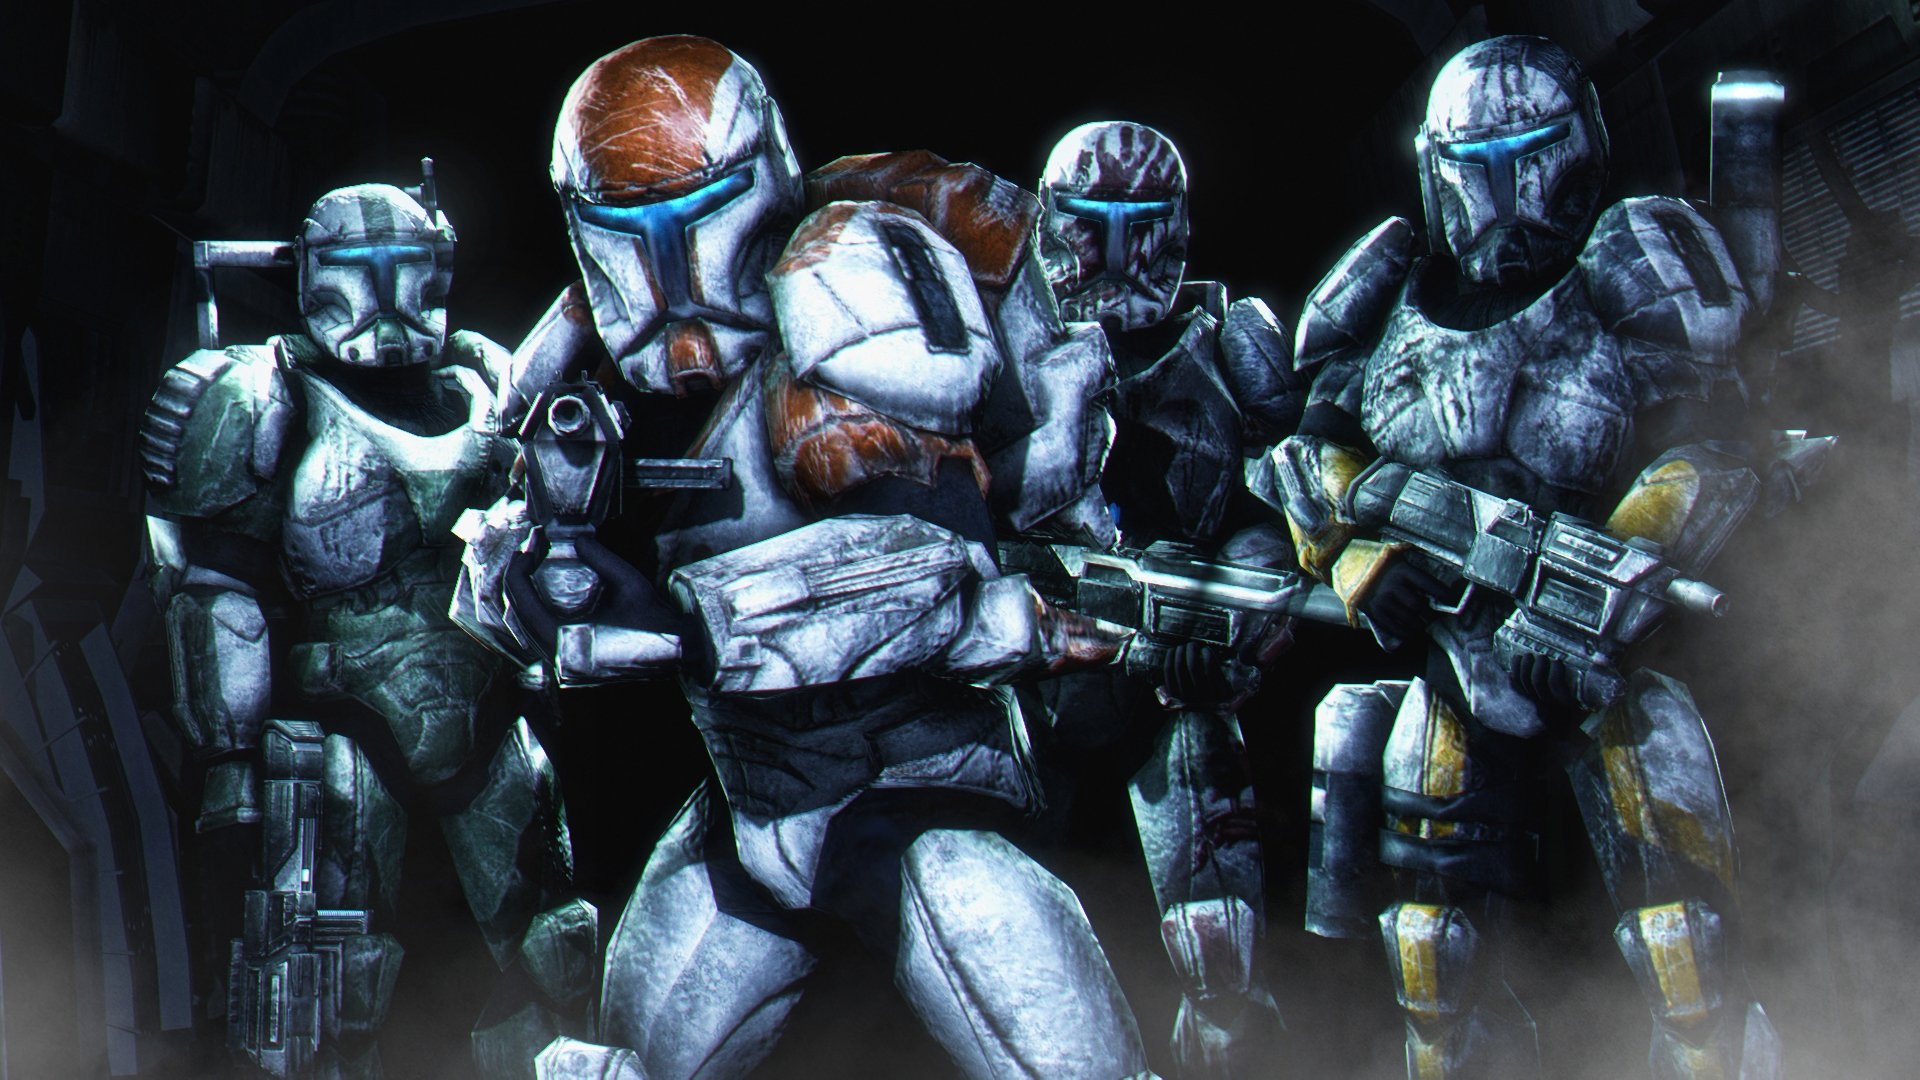 delta squadron sev, with boss and fixer wallpaper and on sev star wars republic commando wallpapers